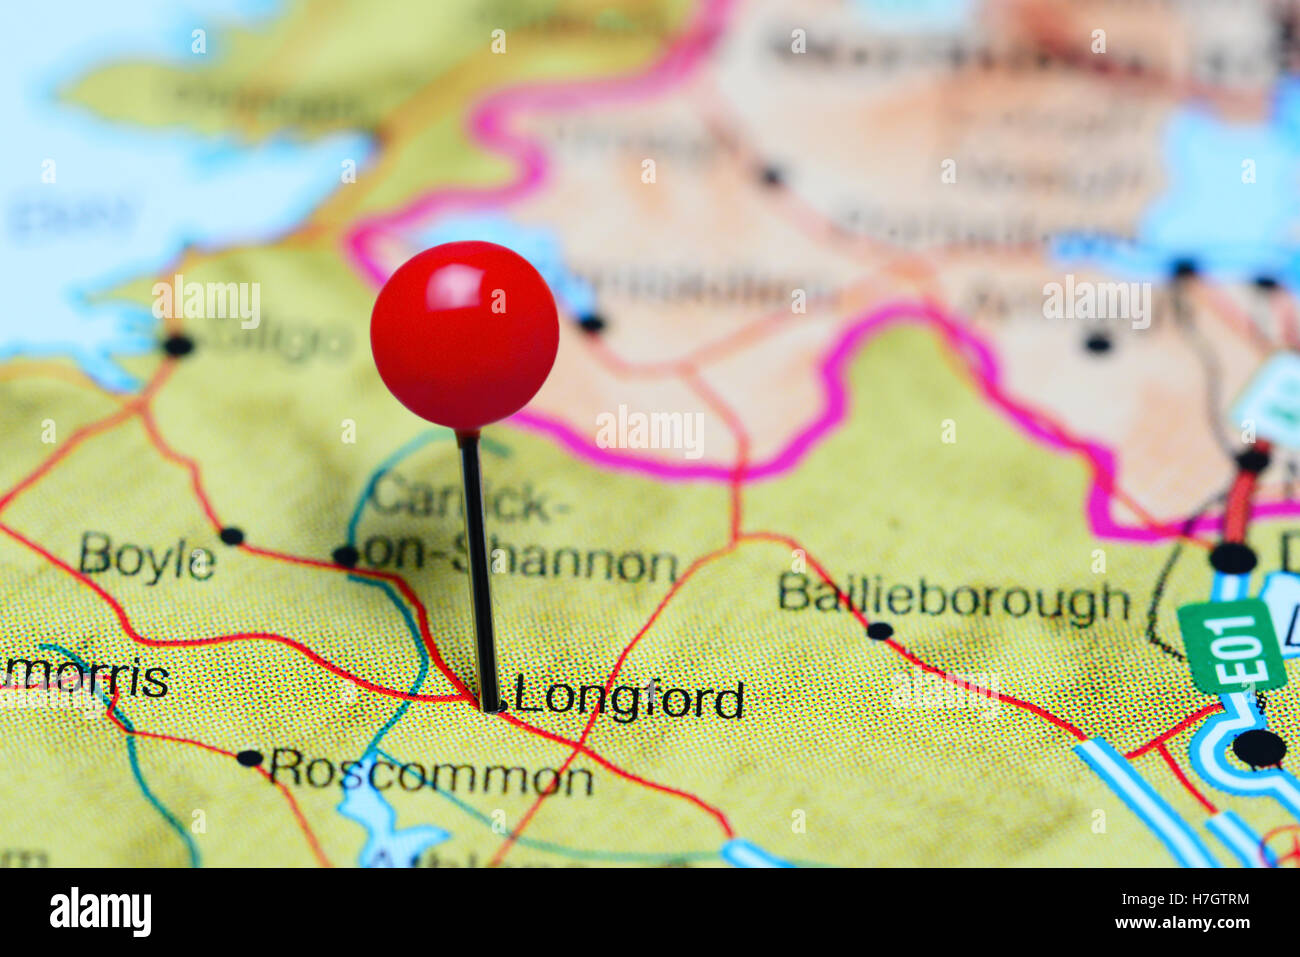 Longford pinned on a map of Ireland Stock Photo